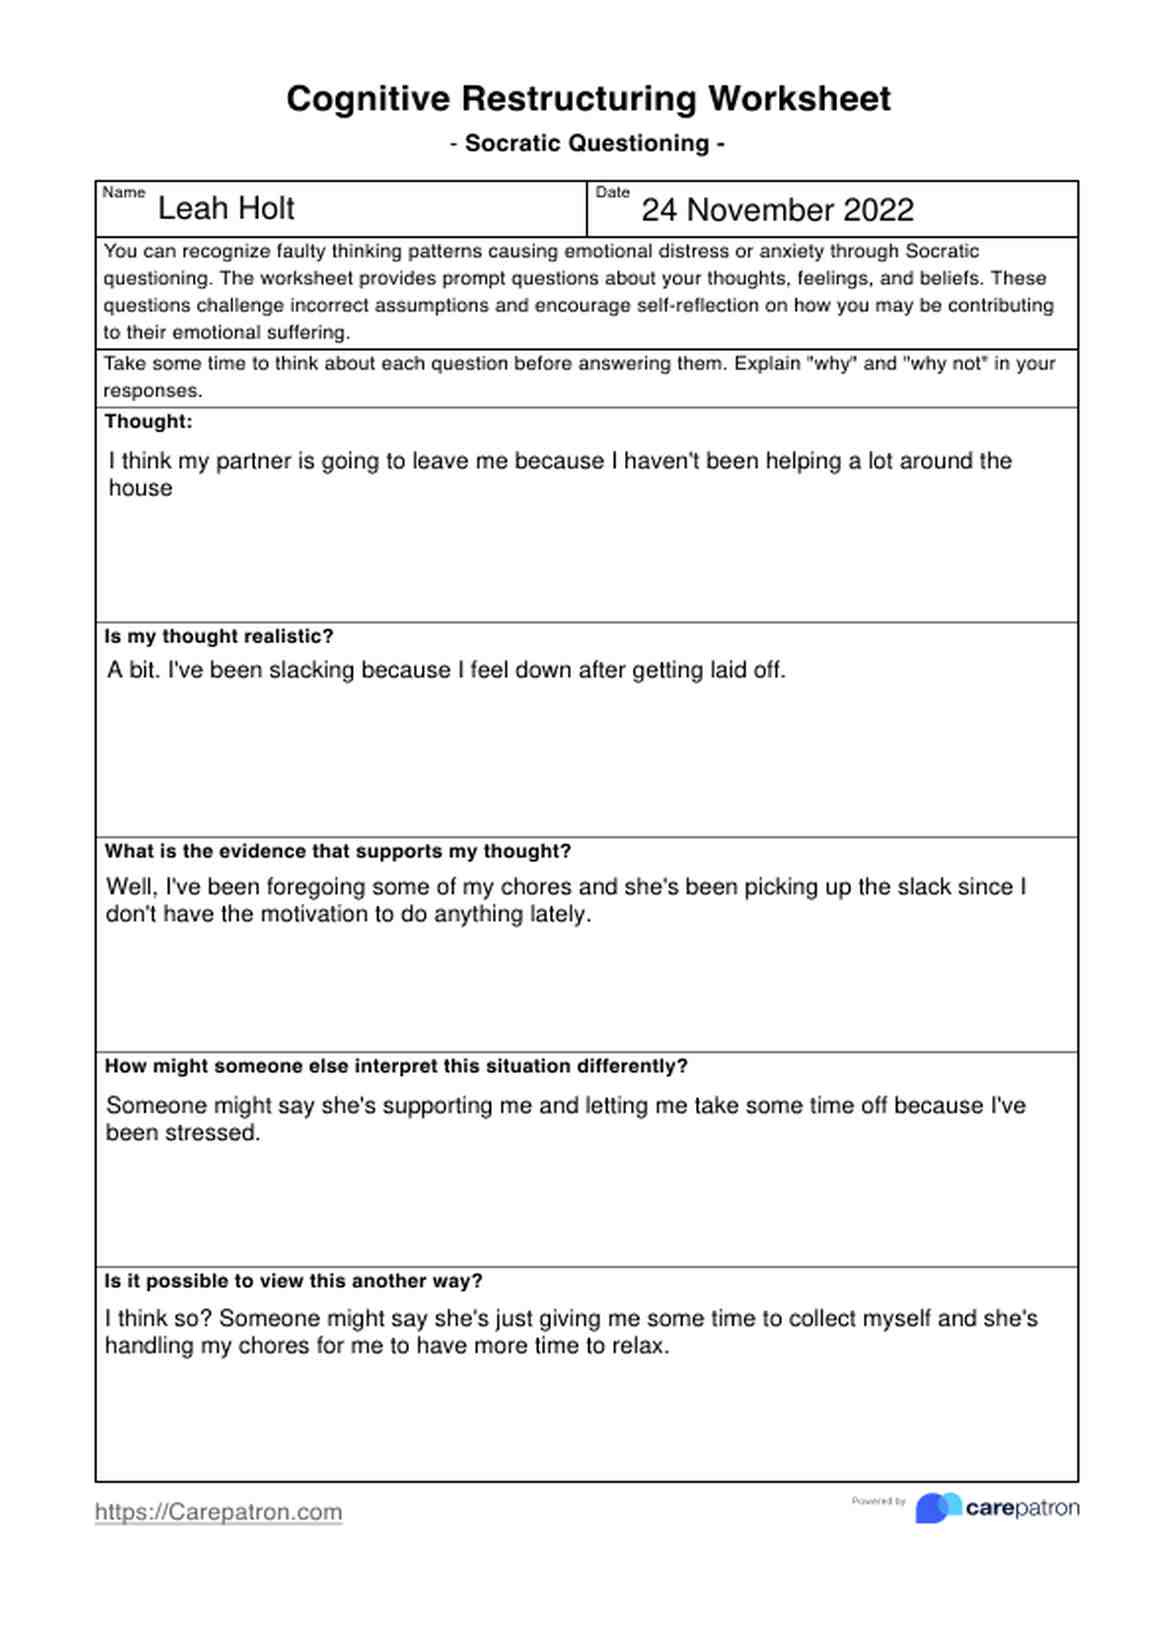 Cognitive Restructuring Worksheets PDF Example